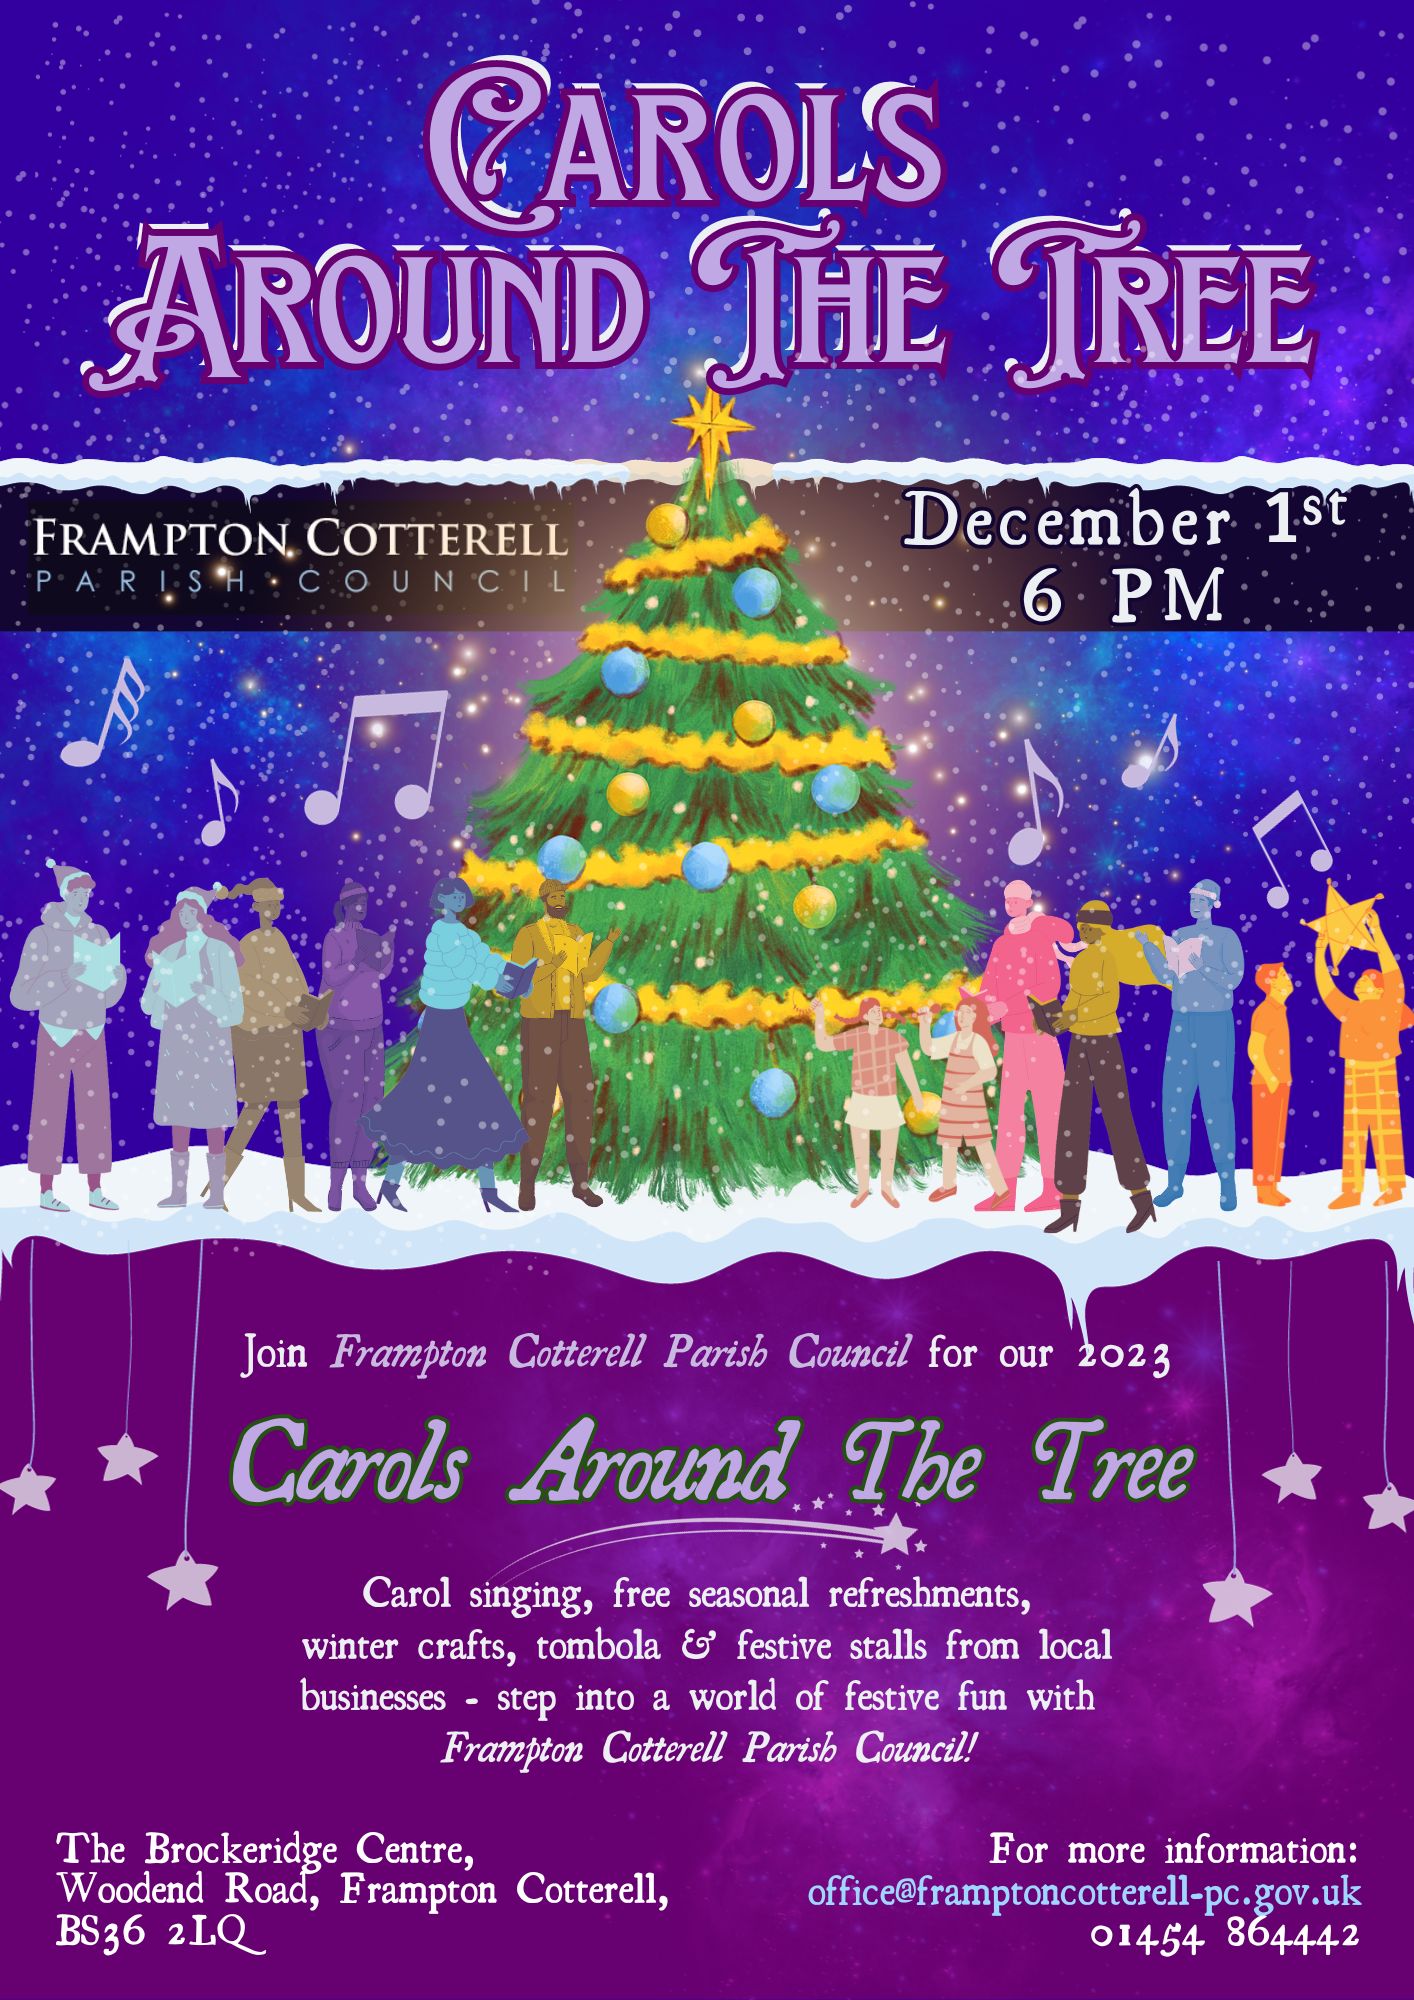 Carols Around the Tree. Frampton Cotterell Parish Council. December 1st, 6PM. Join Frampton Cotterell Parish Council for our 2023 Carols Around The Tree. Carol singing, free seasonal refreshments, winter crafts, tombola & festive stalls from local businesses - step into a world of festive fun with Frampton Cotterell Parish Council! The Brockeridge Centre, Woodend Road, Frampton Cotterell, BS36 2LQ. For more information: office@framptoncotterell-pc.gov.uk 01454 86444